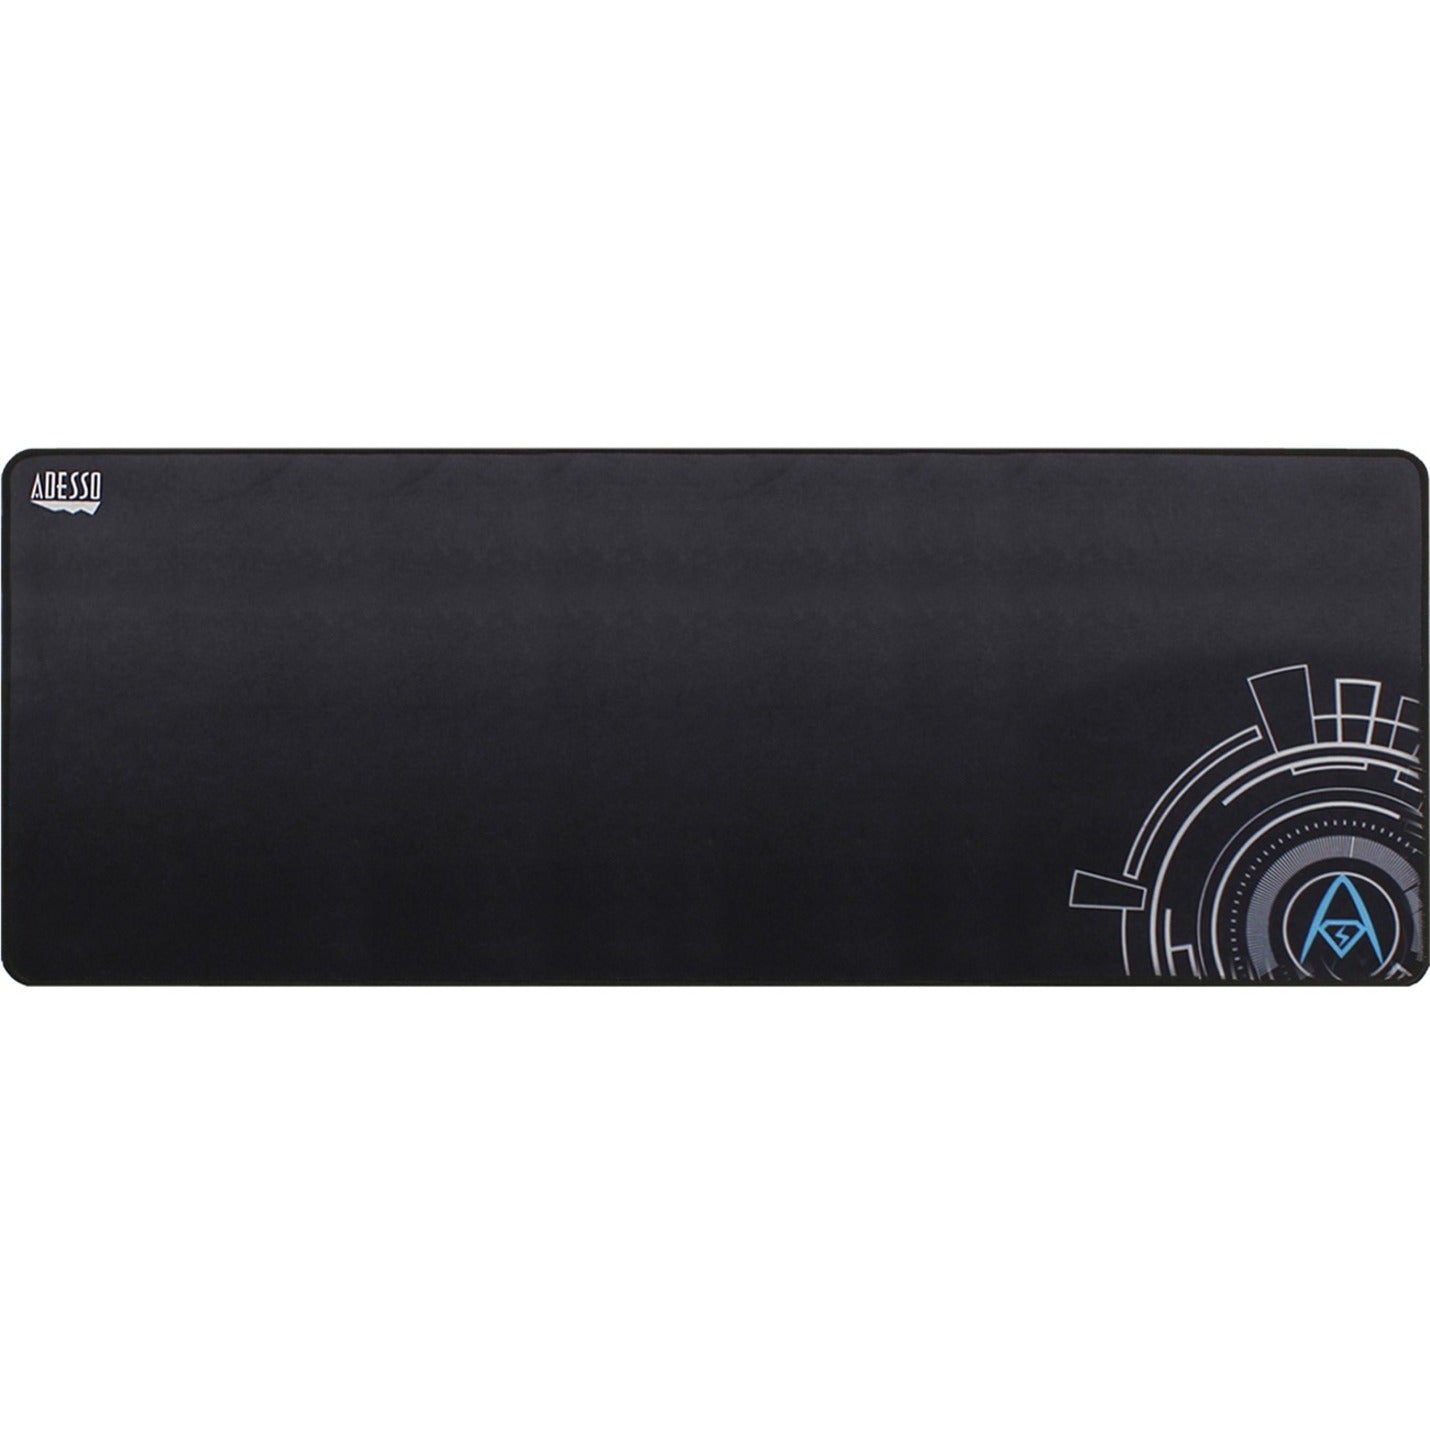 Adesso TRUFORM P104 32 x 12 Inches Gaming Mouse Pad, Smooth, Durable, Anti-slip